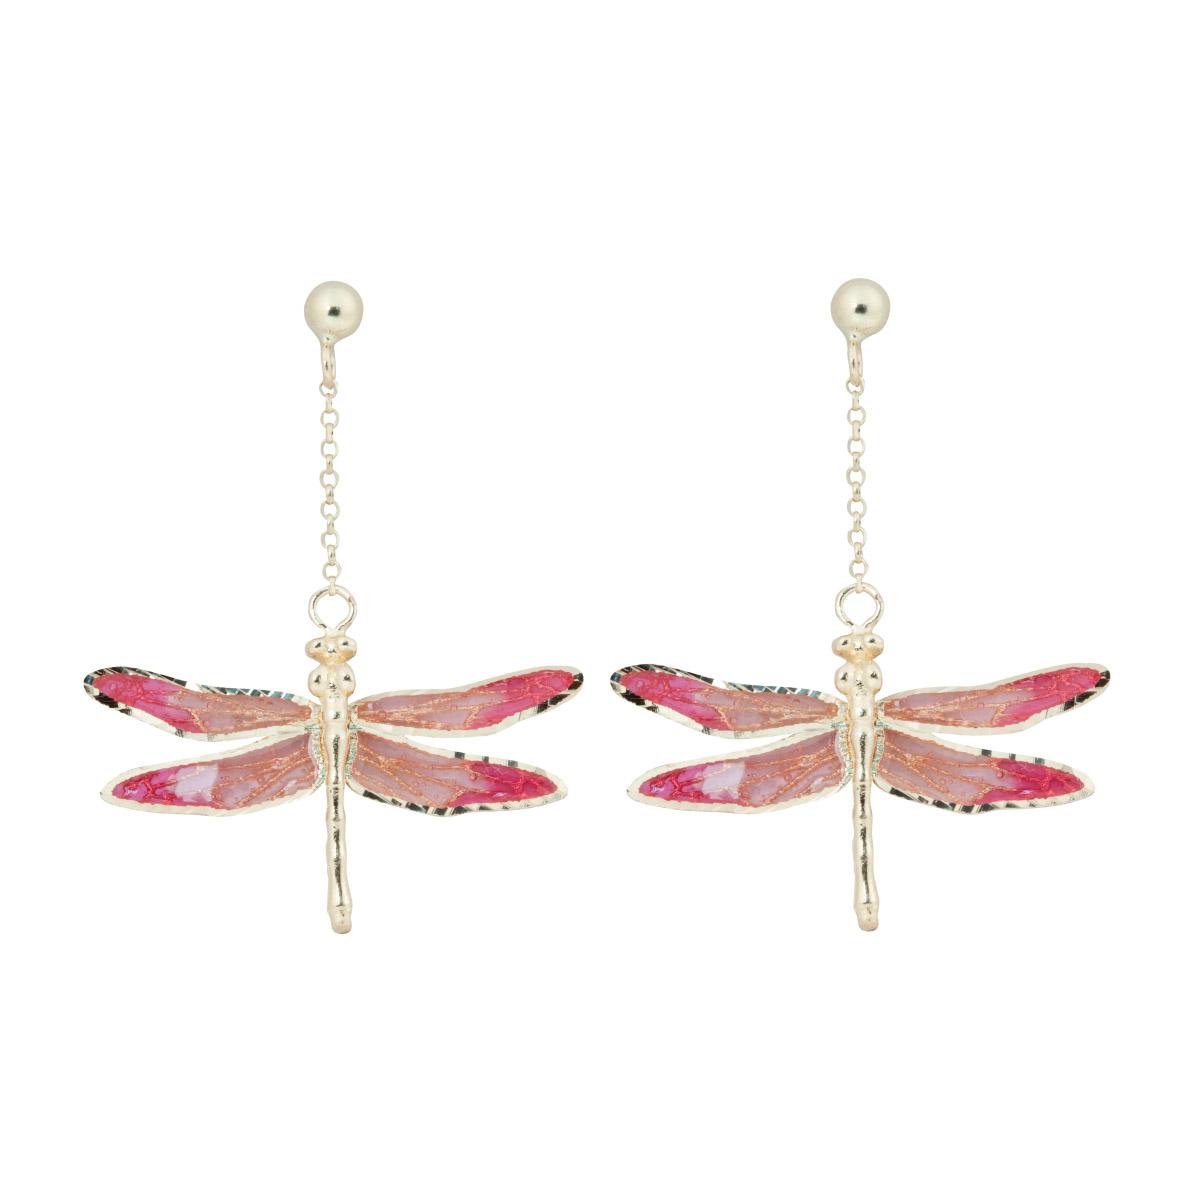 Dragonfly earrings in 18kt yellow gold, cathedral enamel - OE4894-MG